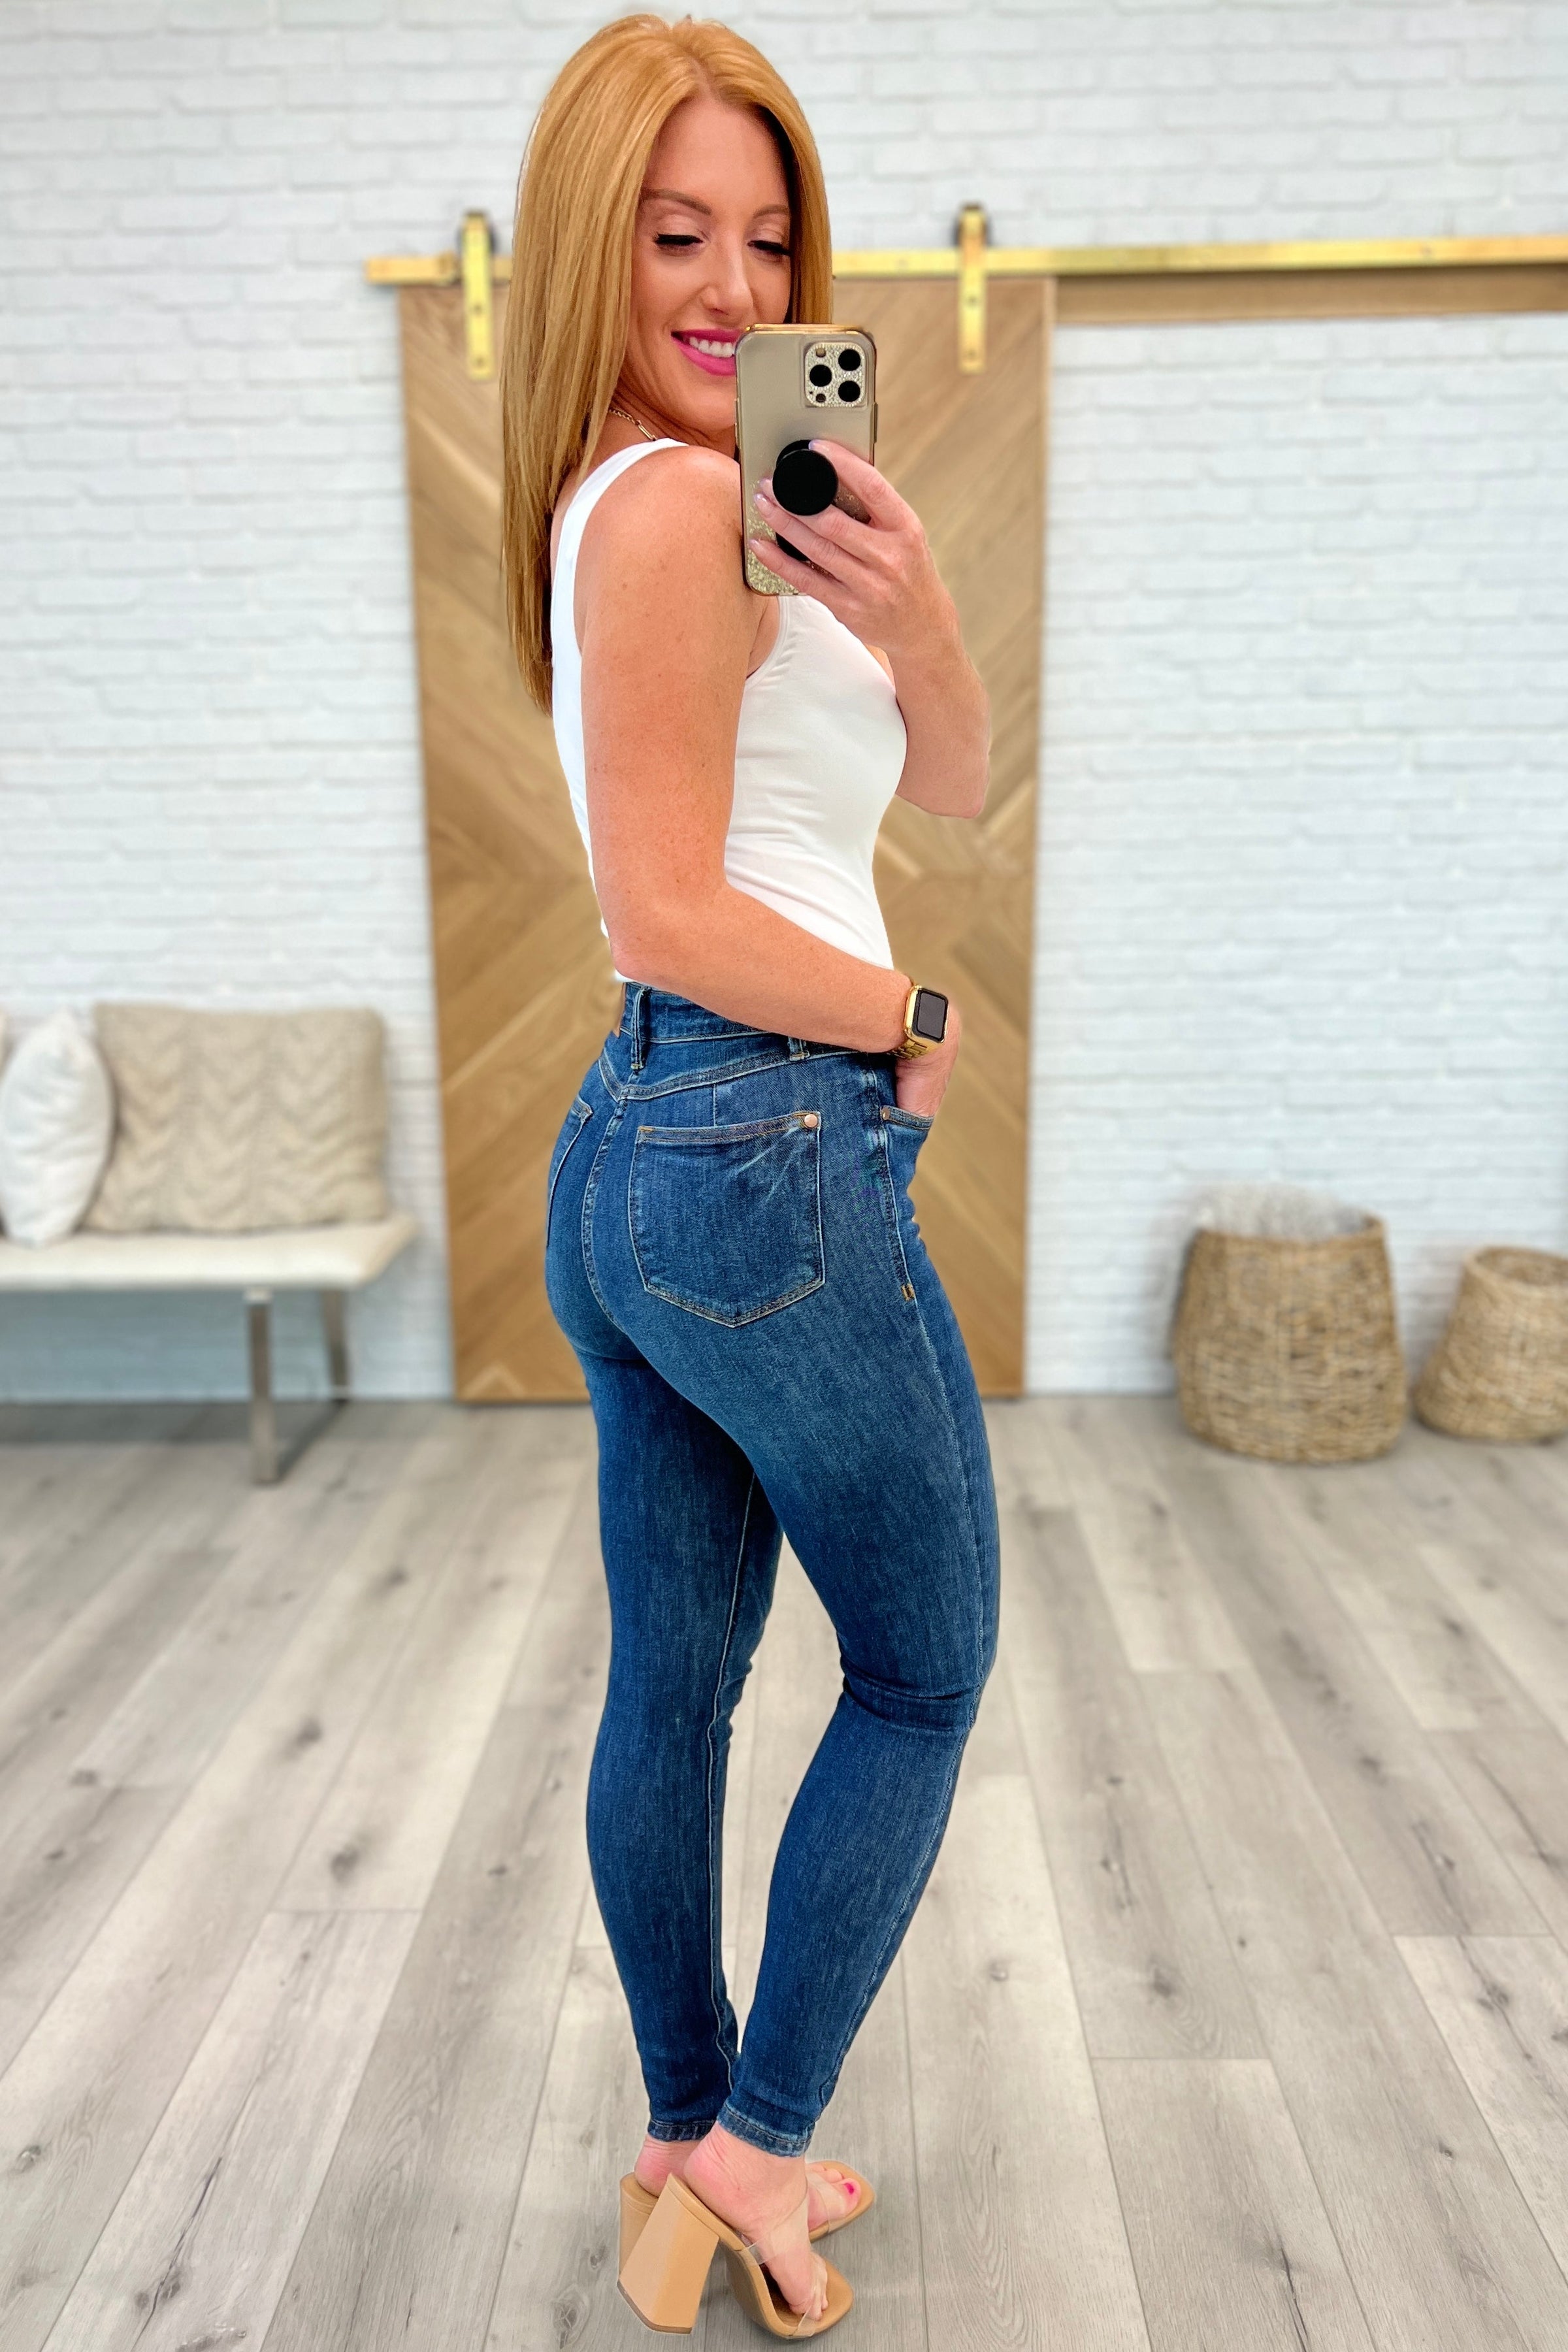 Cora High Rise Control Top Skinny Jeans - JUDY BLUE – Junk in the Trunk  Boutique